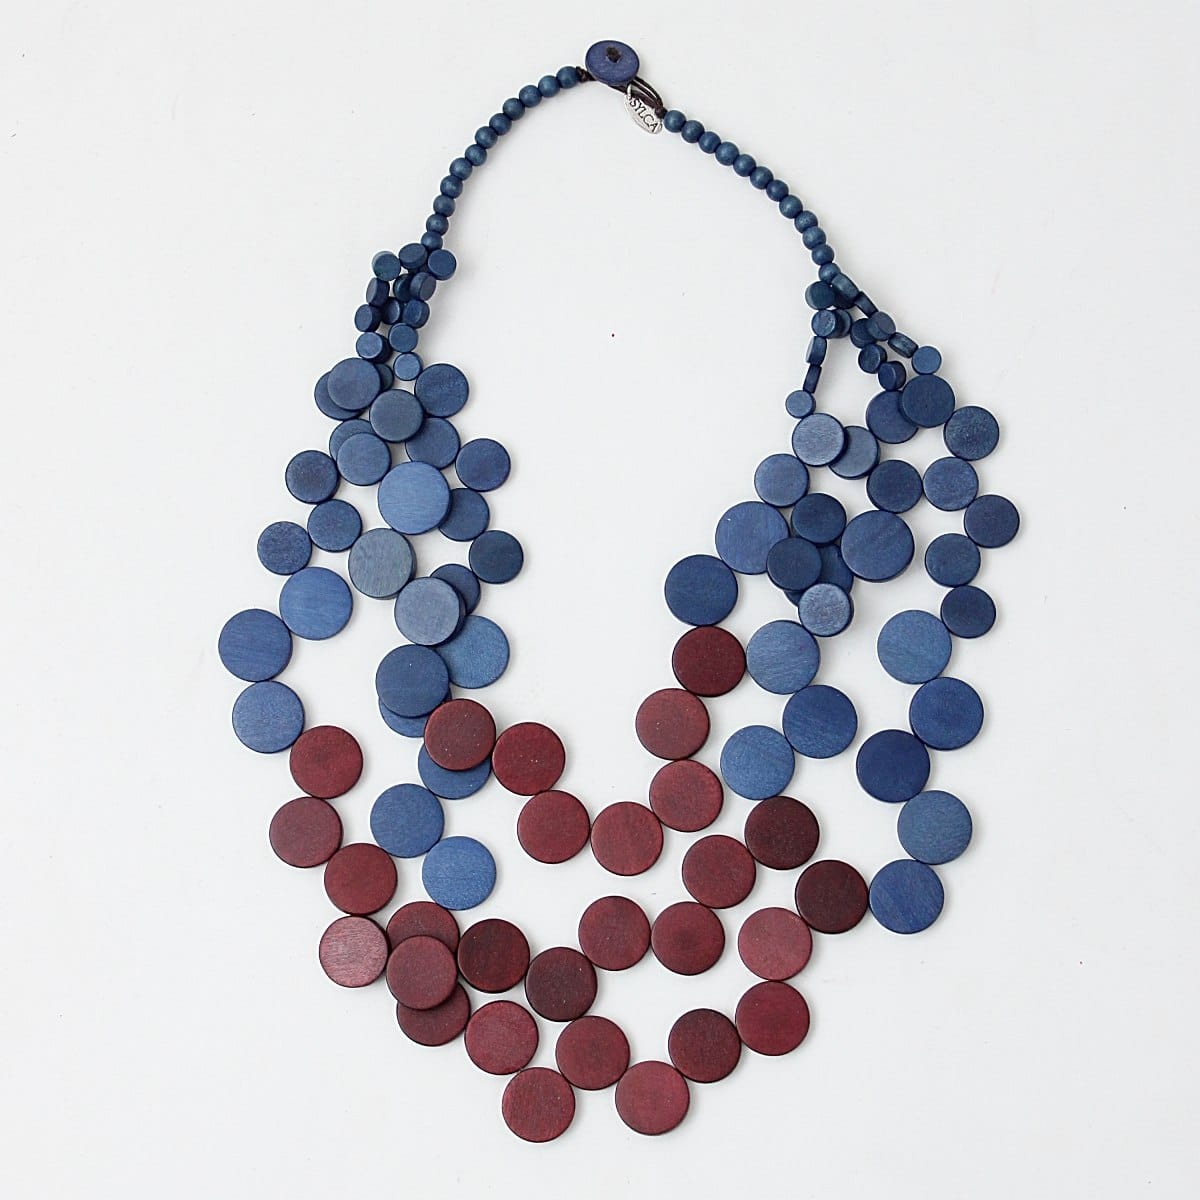 One of our favorite layered necklaces, made of carefully handcrafted wood, is back in beautiful new colorway of purple and blue.